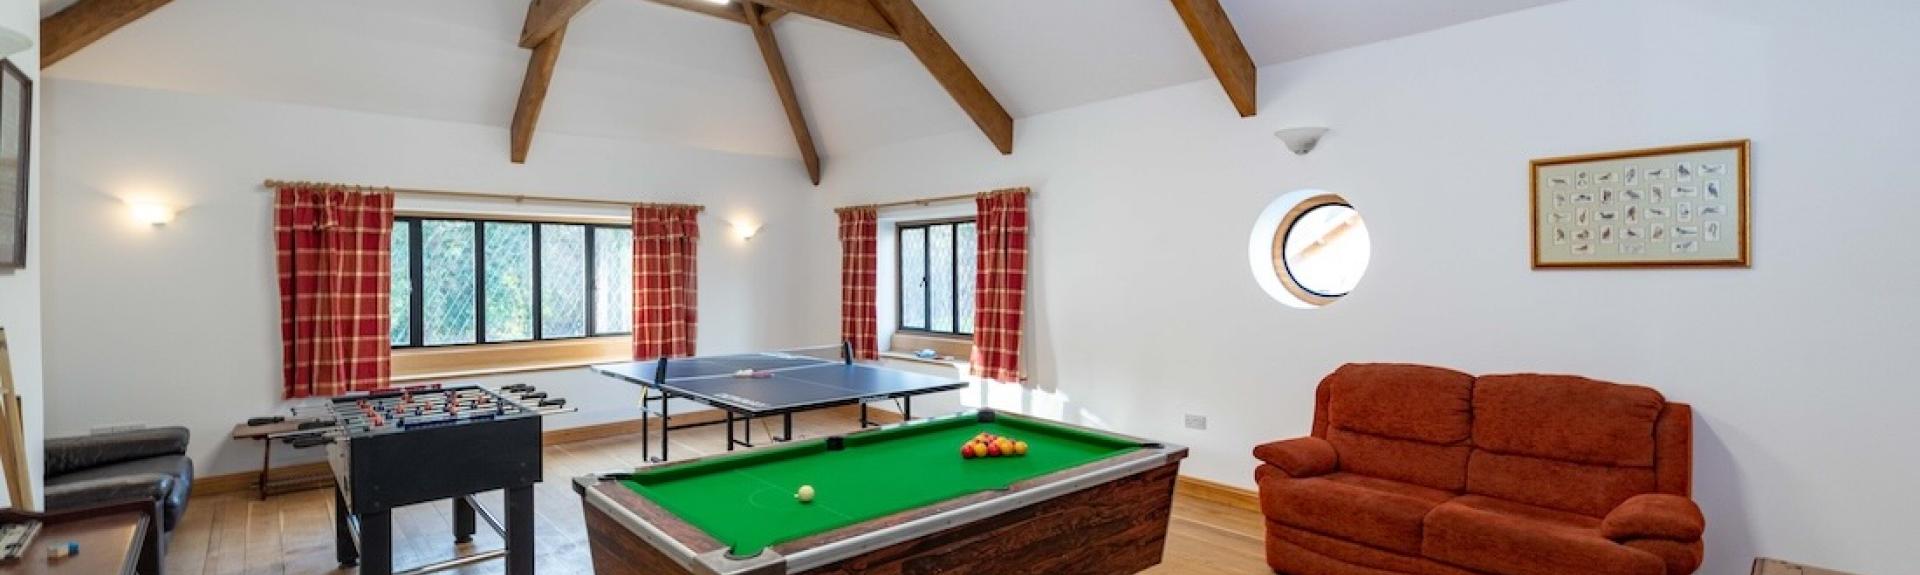 A holiday cottage games room with table football, table tennis an pool tables. in a games room.